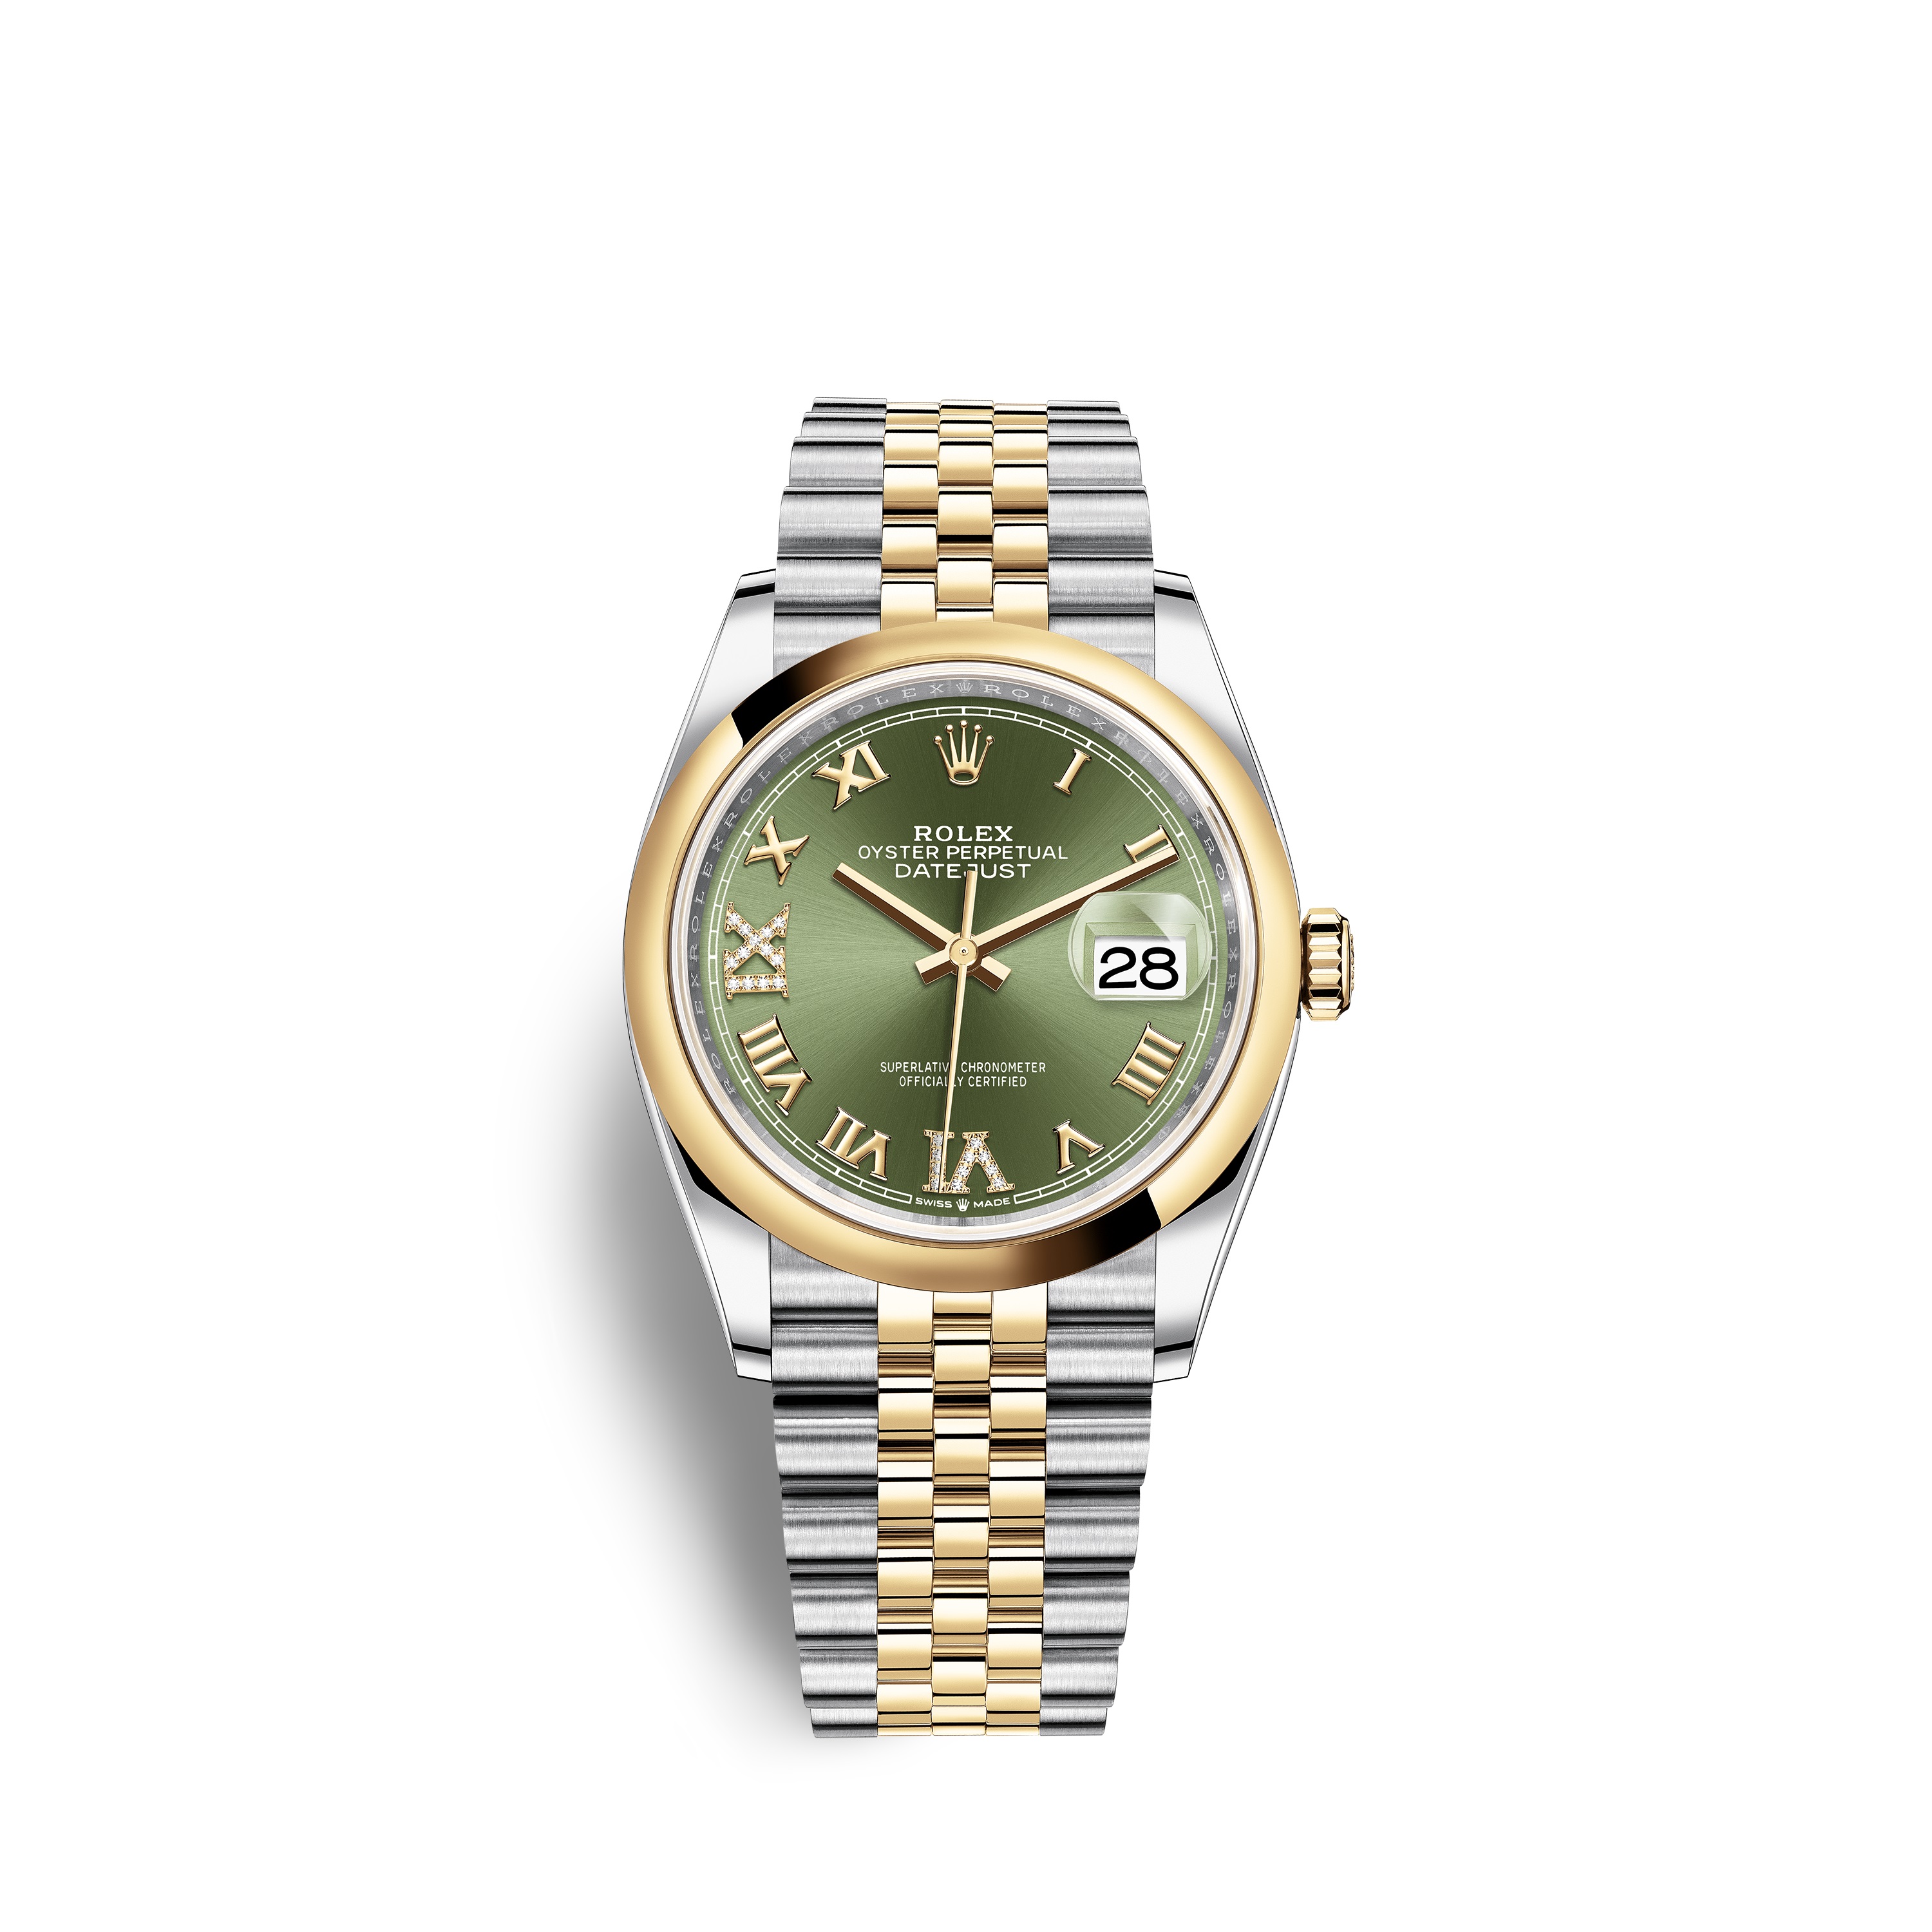 Datejust 36 126203 Gold & Stainless Steel Watch (Olive Green Set with Diamonds)